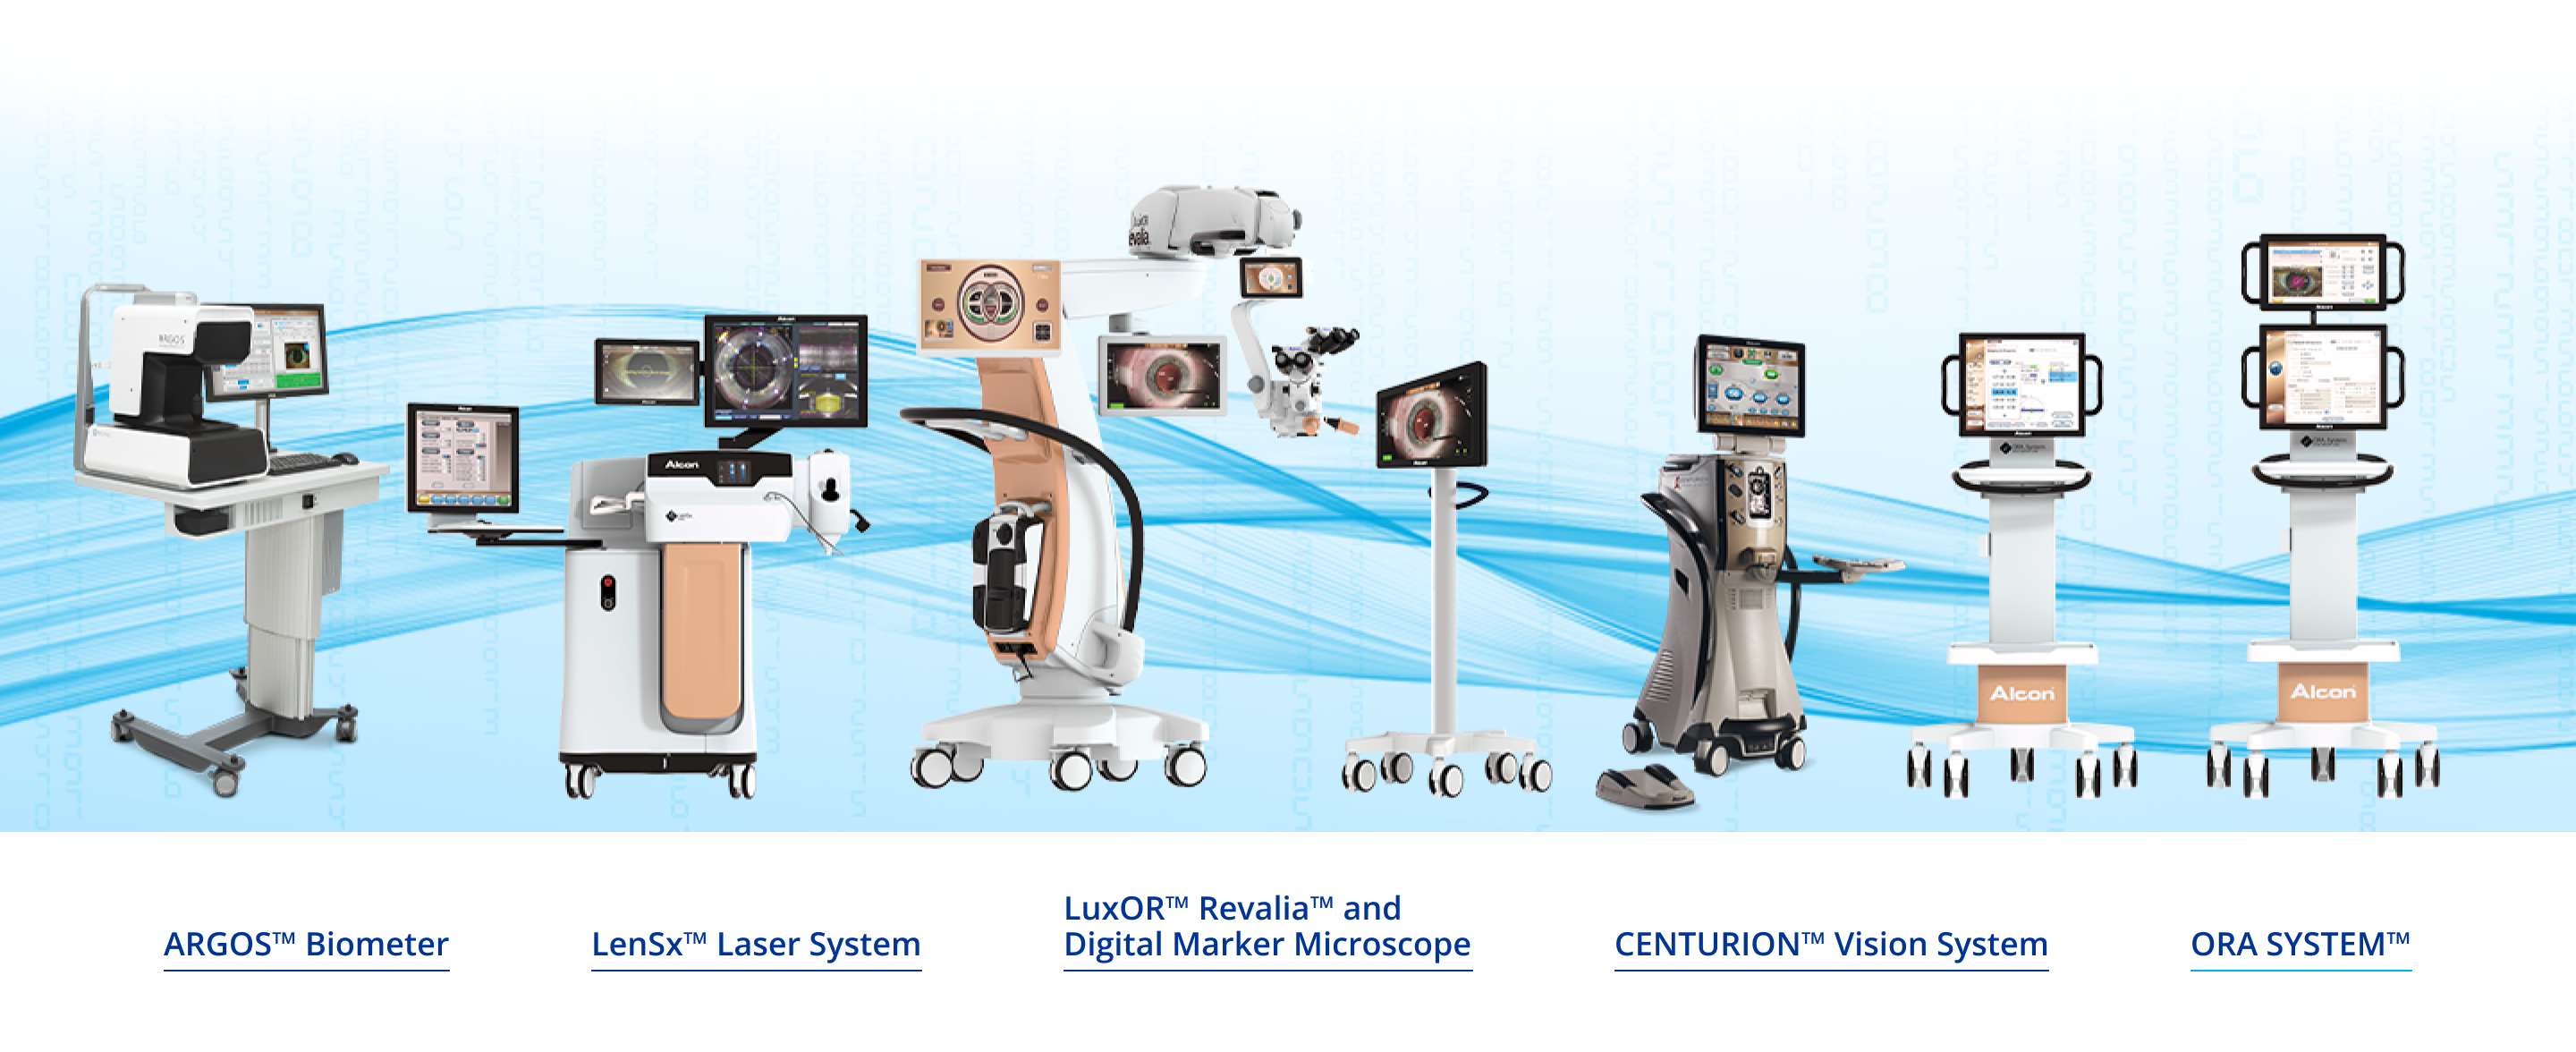 An image showing different surgical devices made by Alcon. The ARGOS Biometer, LenSx Laser System, LuxOR Revalia Ophthalmic Microscope, Verion Digital Marker, Centurion Vision System, ORA SYSTEM Intraoperative Abberometer.